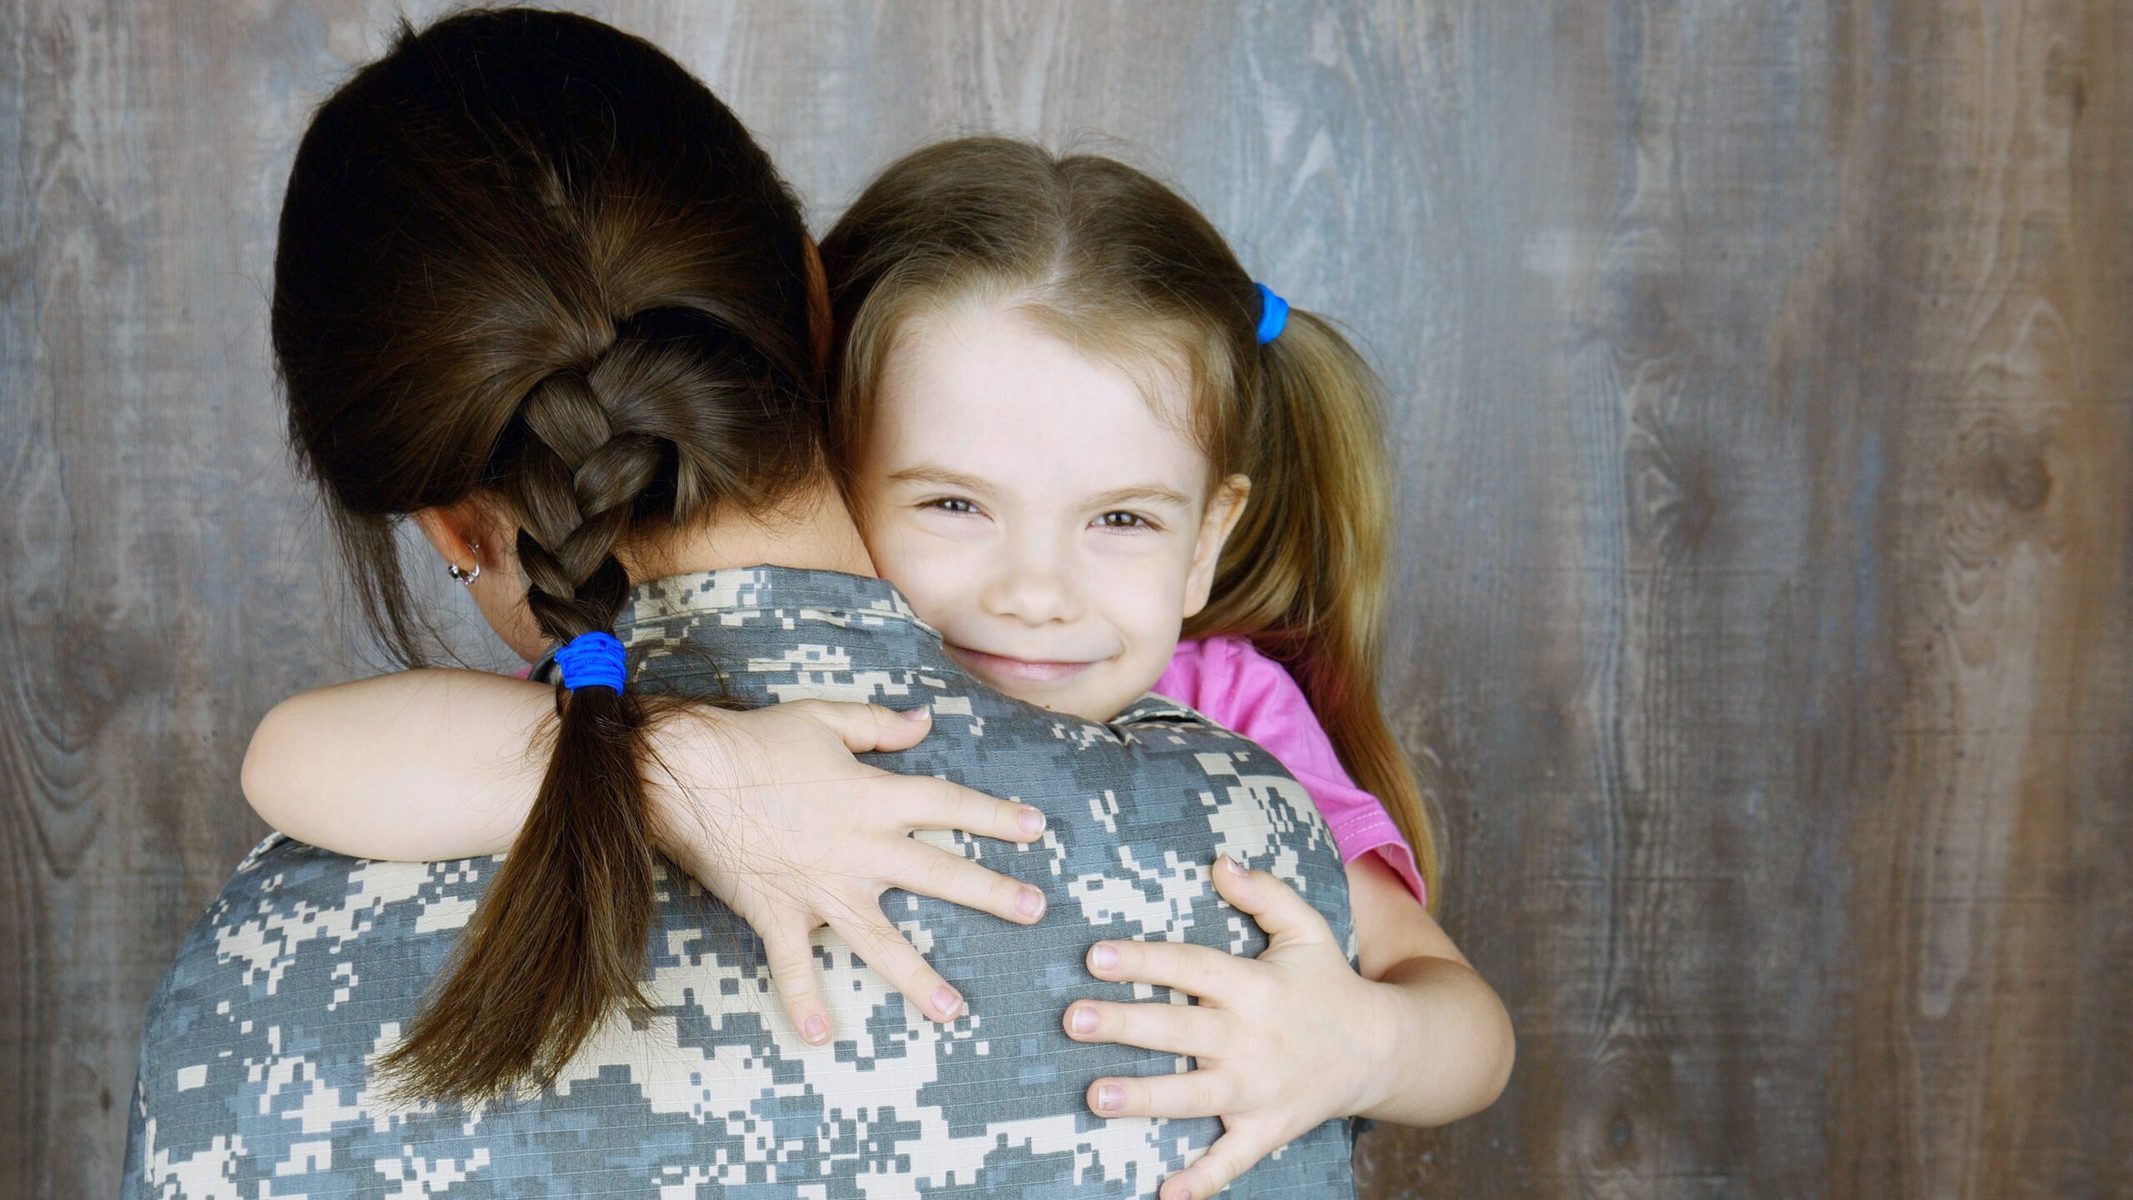 Servicewomen & Miscarriage Causes: Toxic Exposure In The Military Can Affect Motherhood